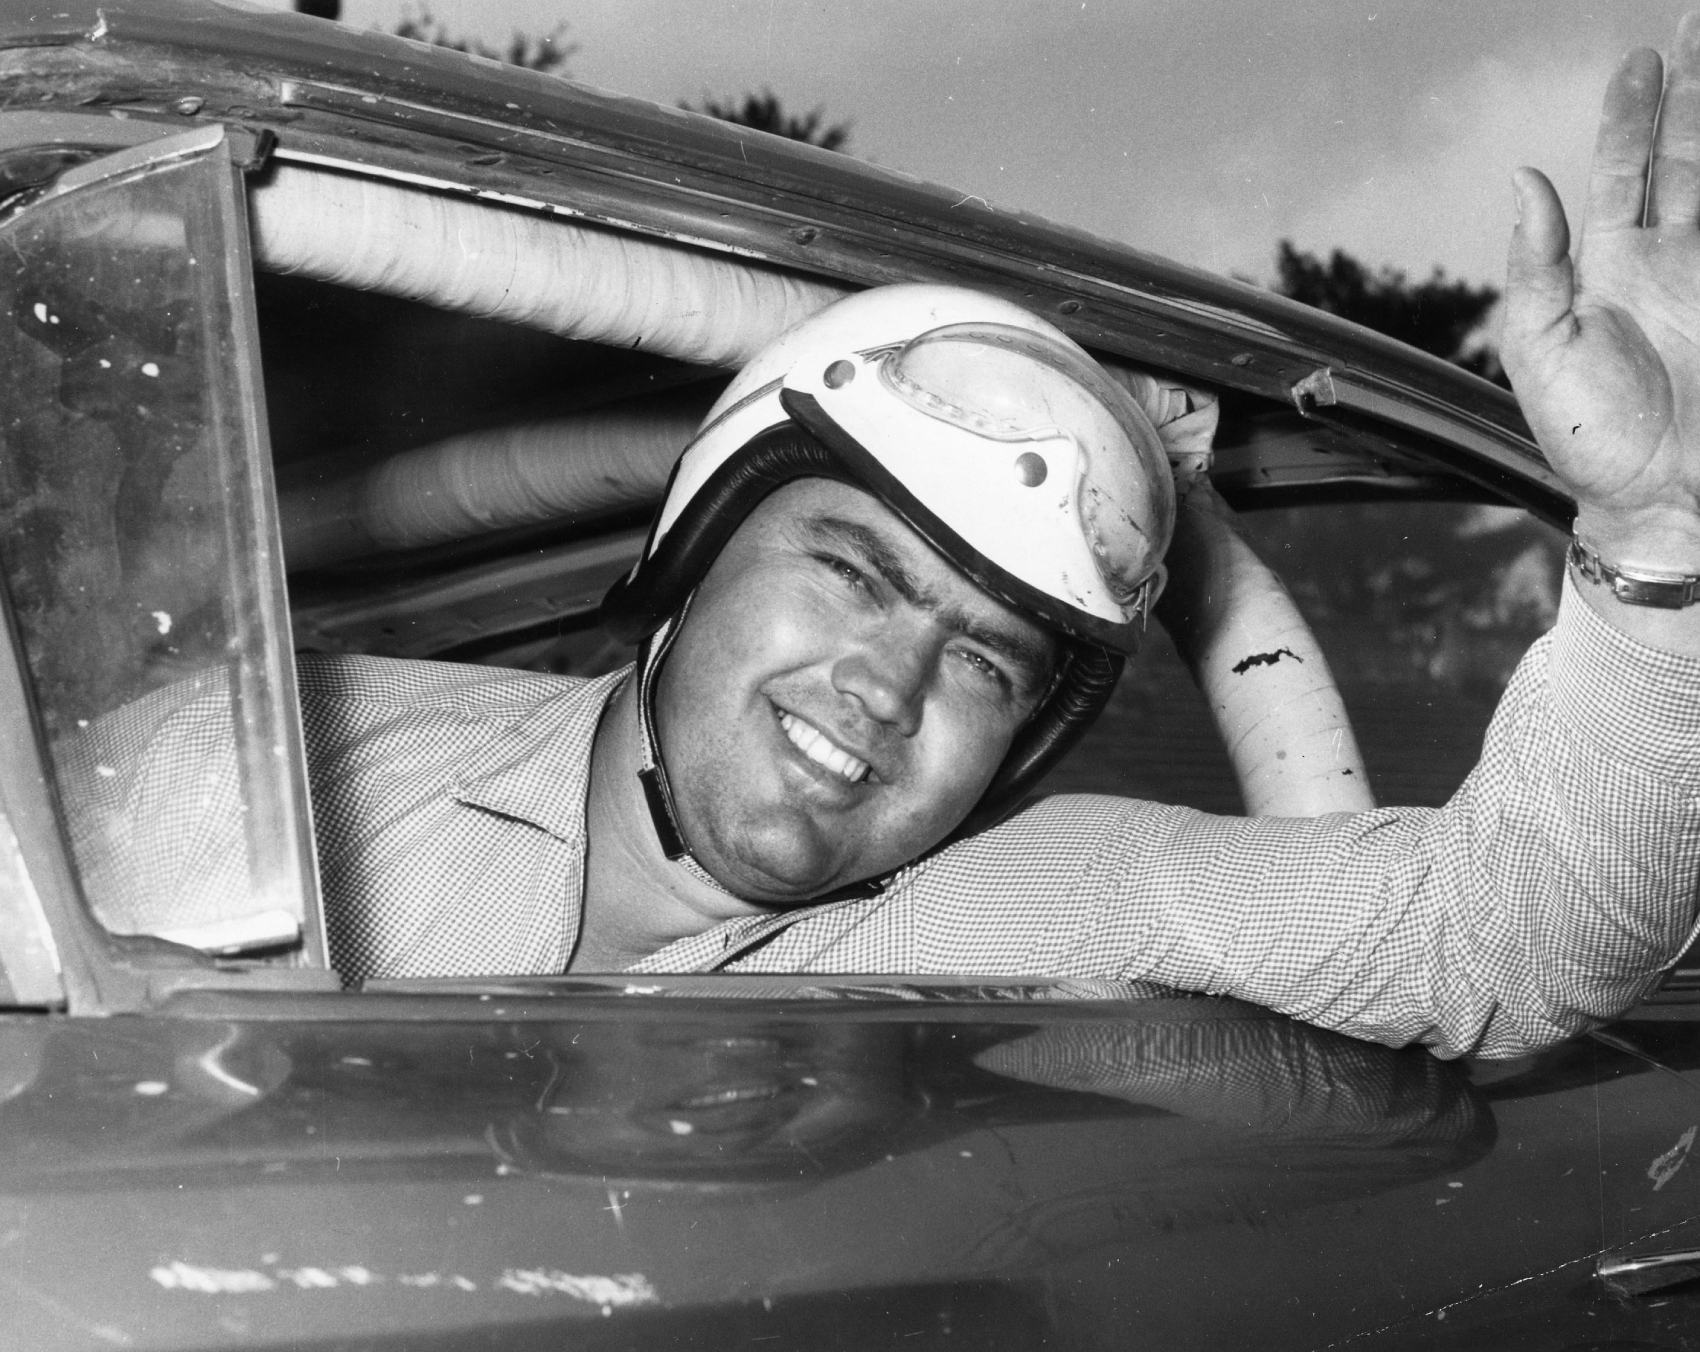 NASCAR Legend Junior Johnson Served Time in Prison for ‘Moonshining’ Before Getting Pardoned by Ronald Reagan